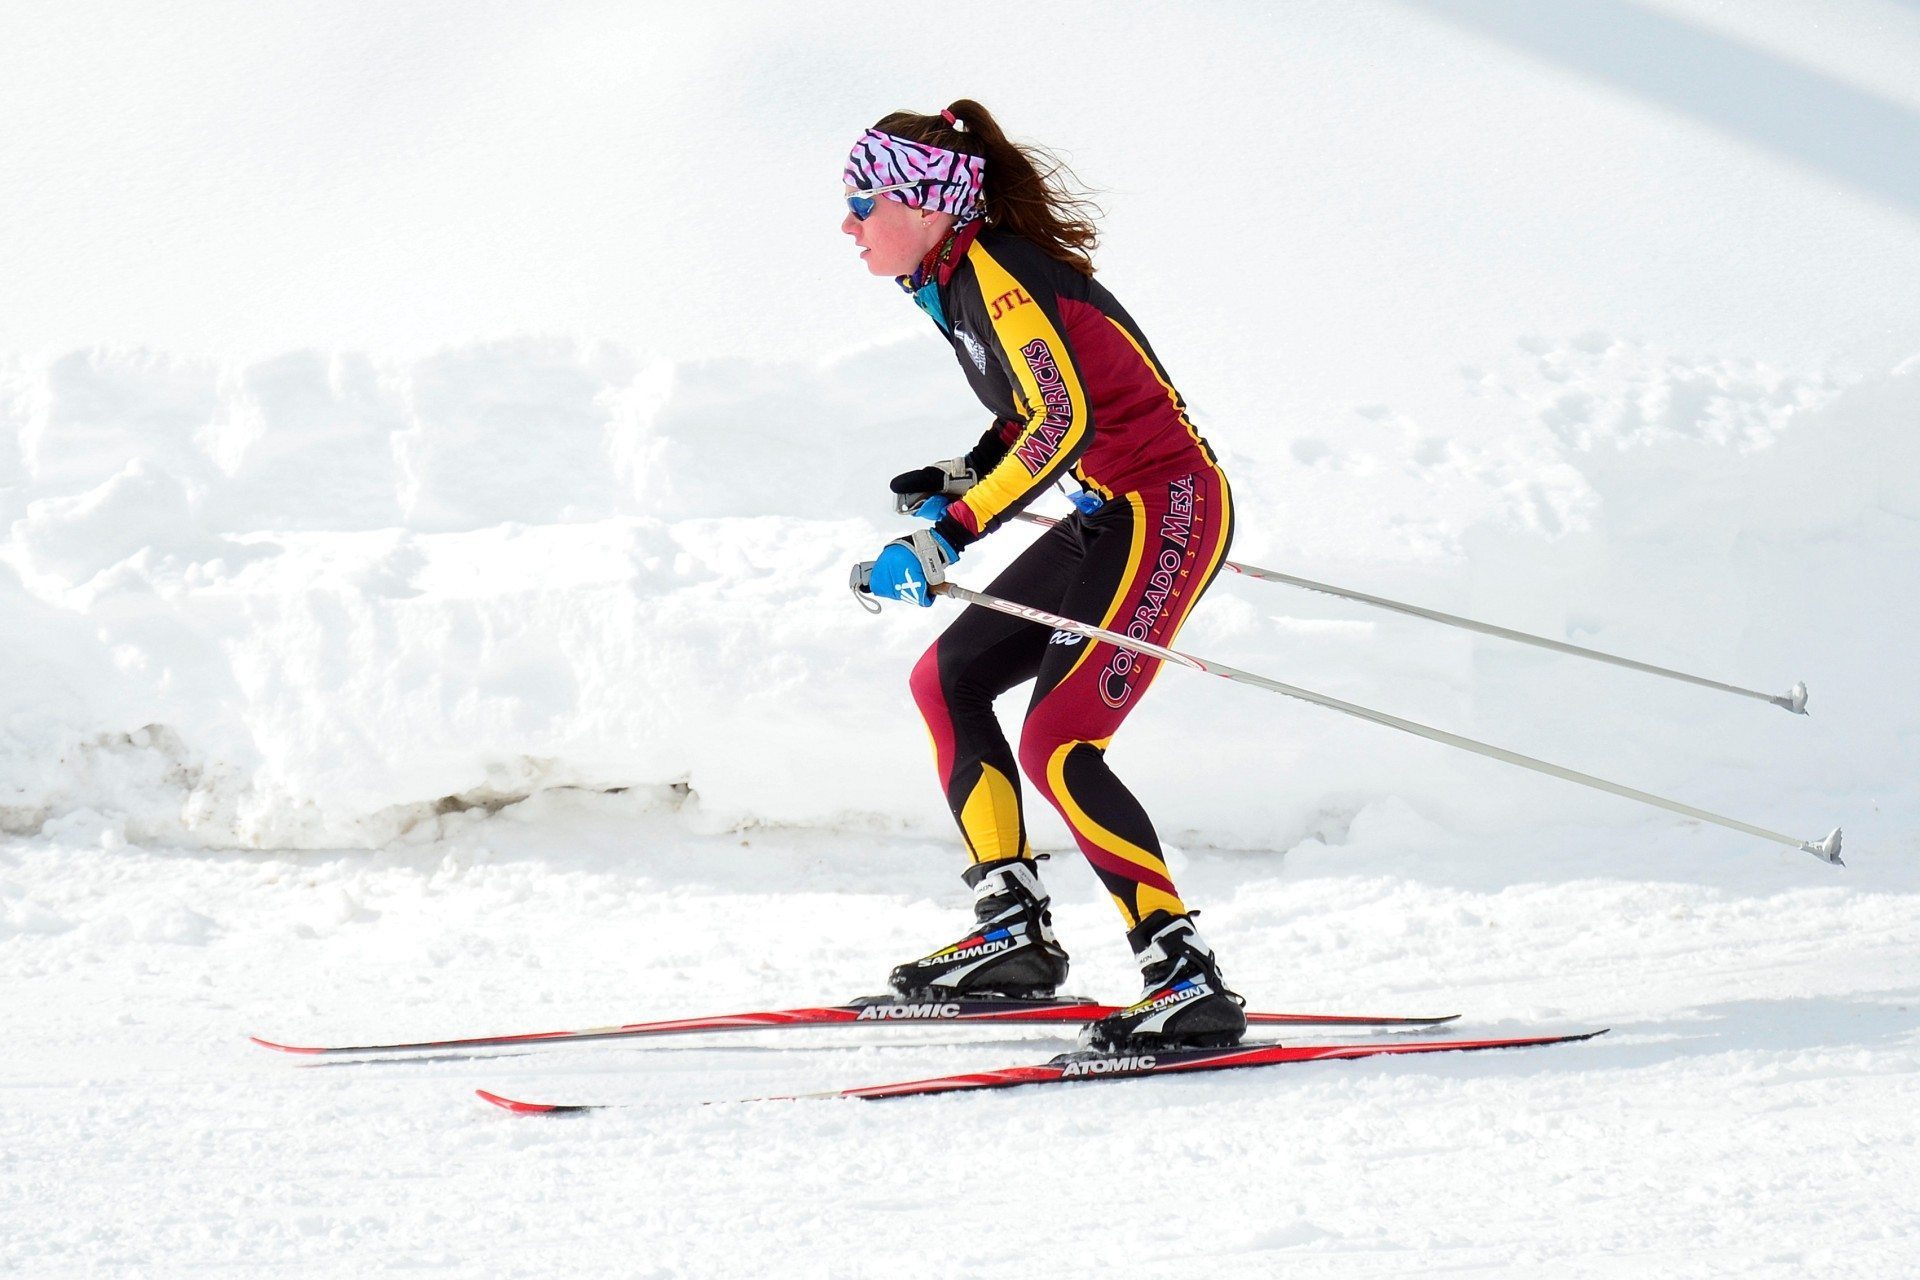 The correct skis will differ in length depending on your ability.